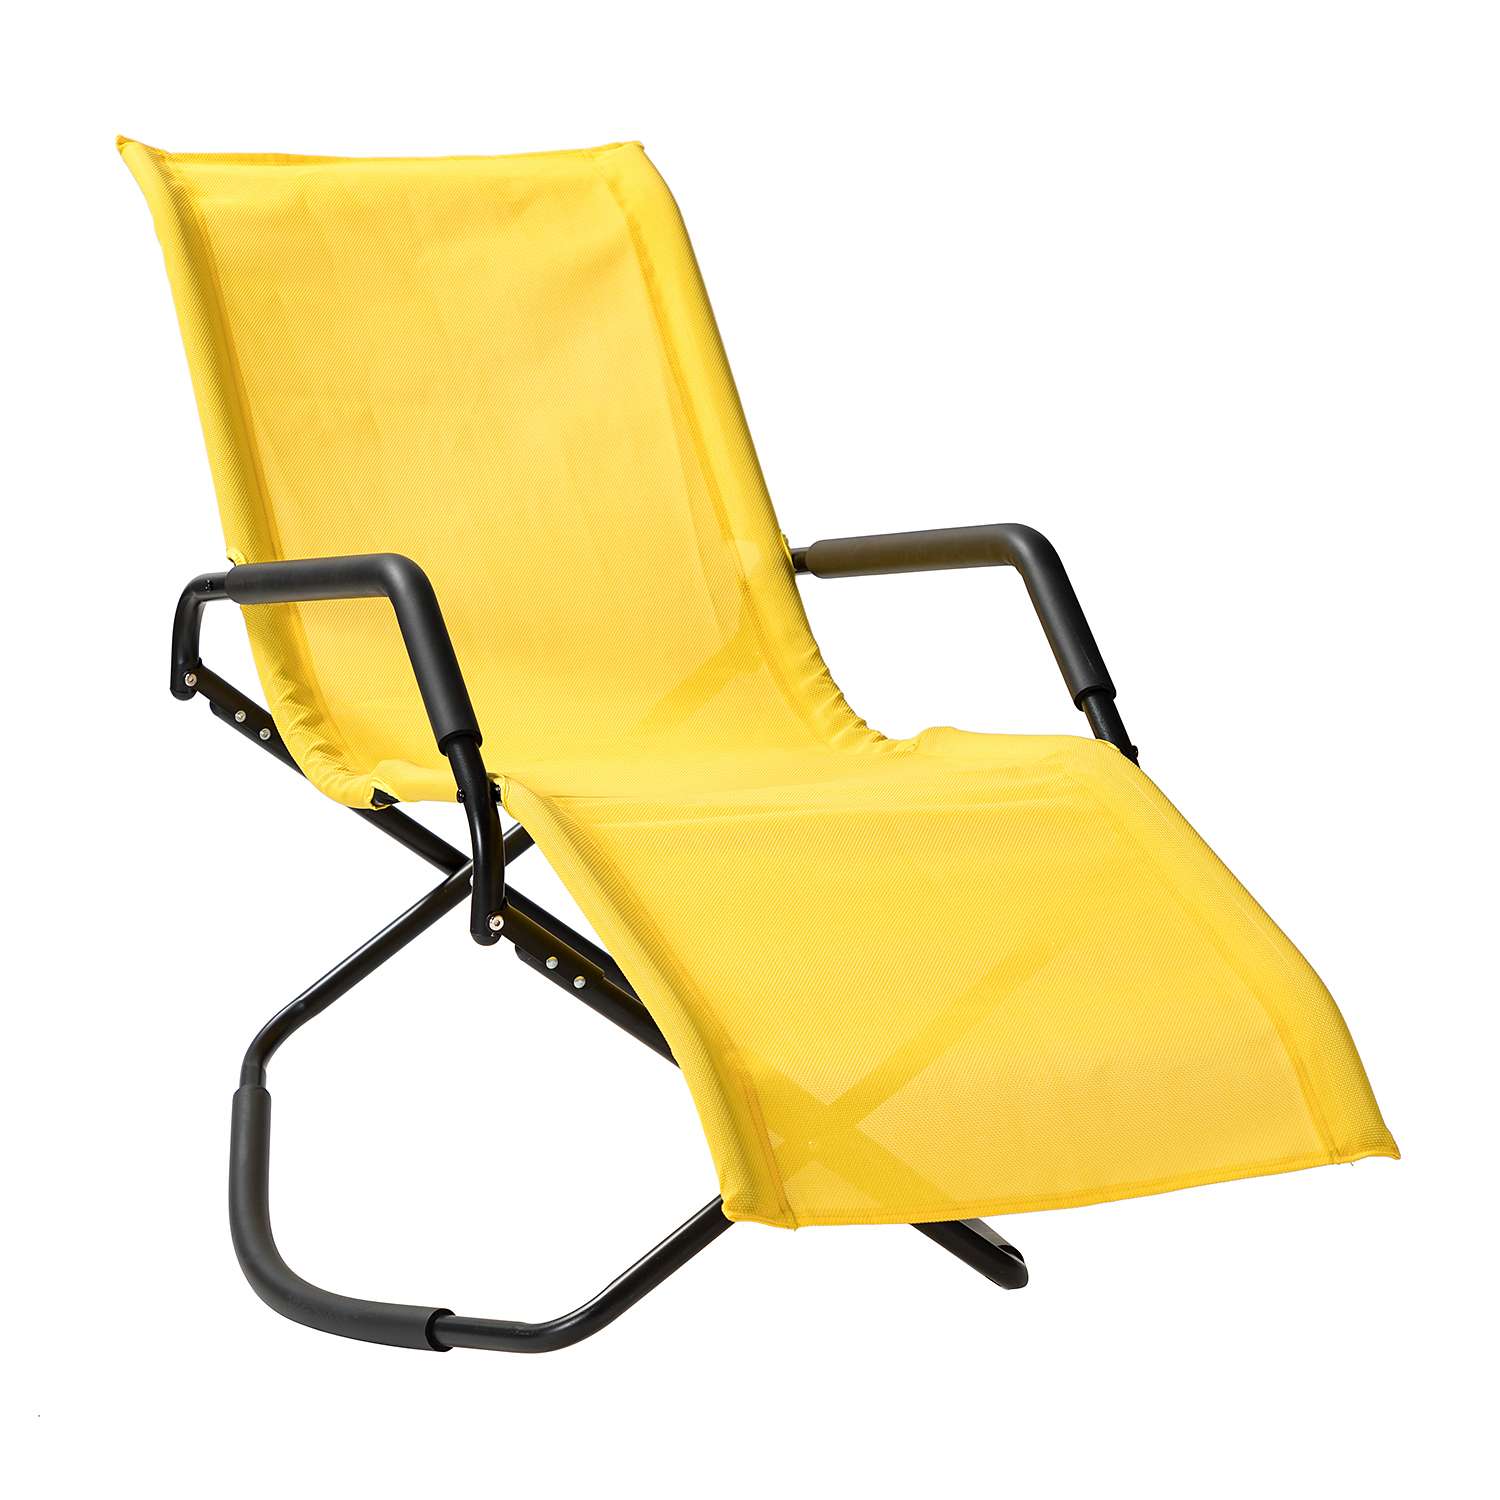 SESSLIFE Folding Reclining Chair, Metal Patio Rocking Recliner, Indoor Outdoor Heavy Duty Portable Chair, TE3144 - image 2 of 7